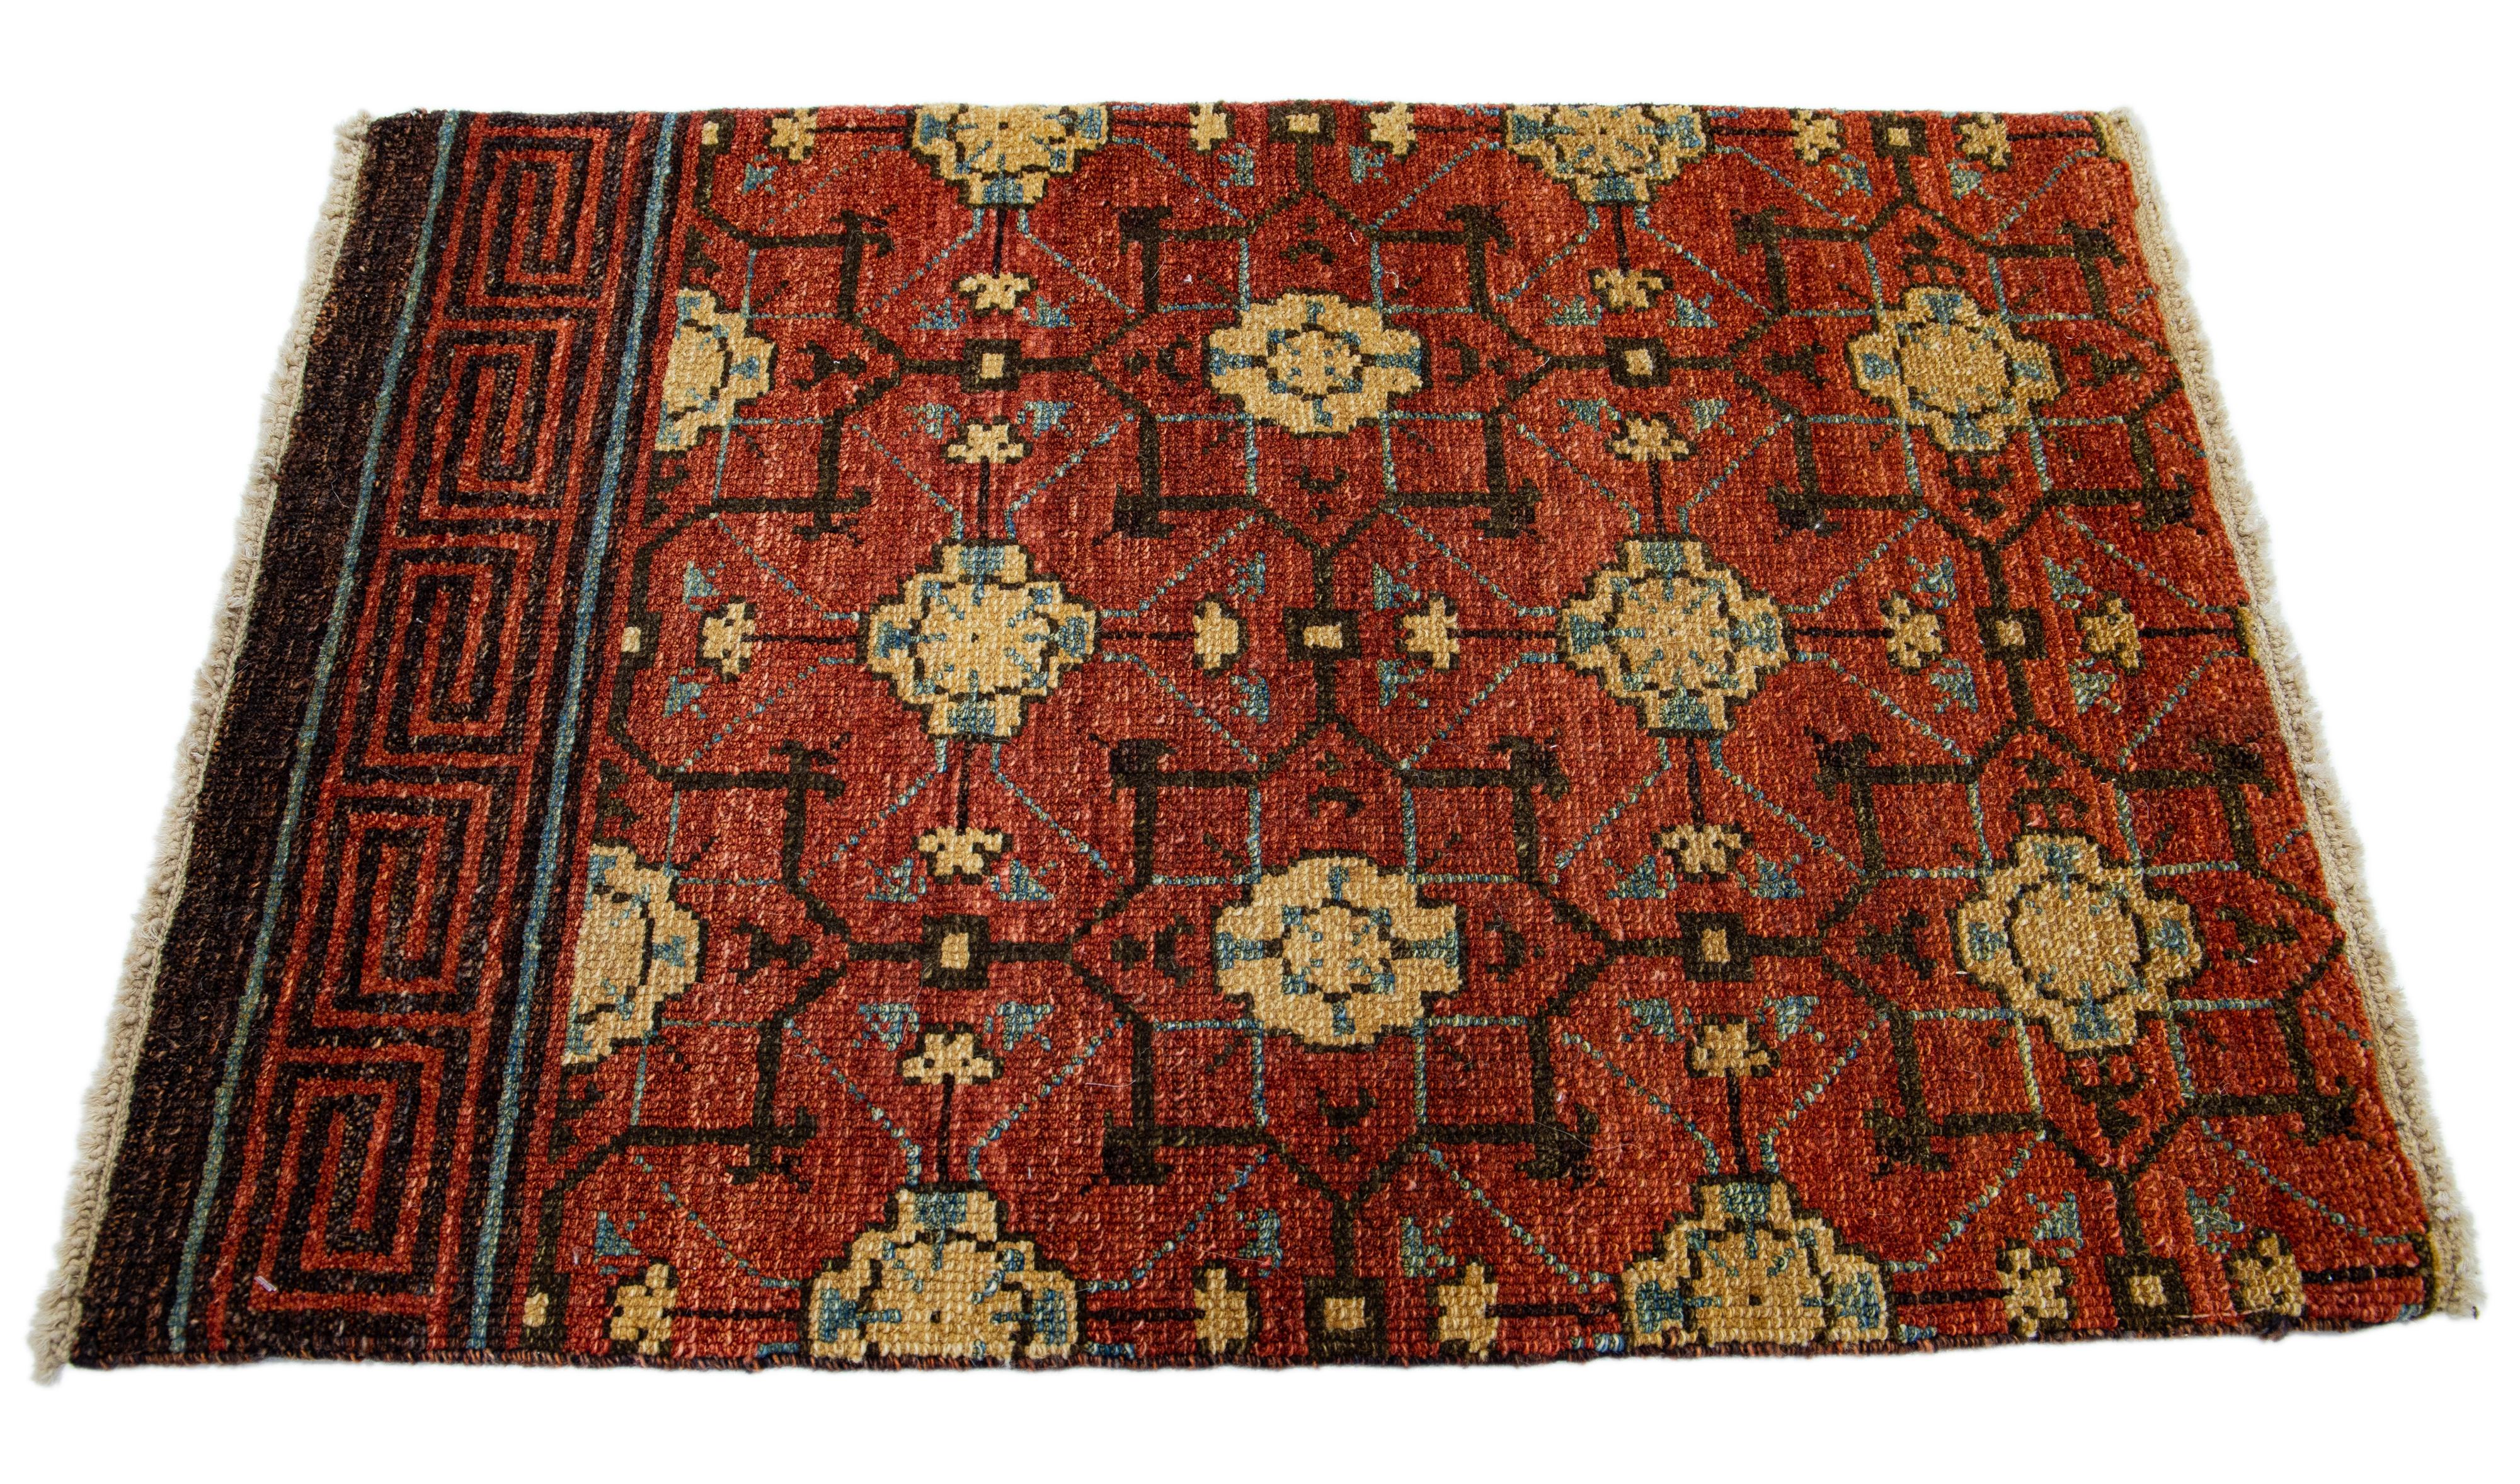 Apadana's Modern Khotan style custom wool rug. Custom sizes and colors made-to-order. 

Material: Wool 
Techniques: Hand-knotted
Style: Khotan
Lead time: Approx. 15-16 wks available 
Colors: As shown, other custom colors are available.